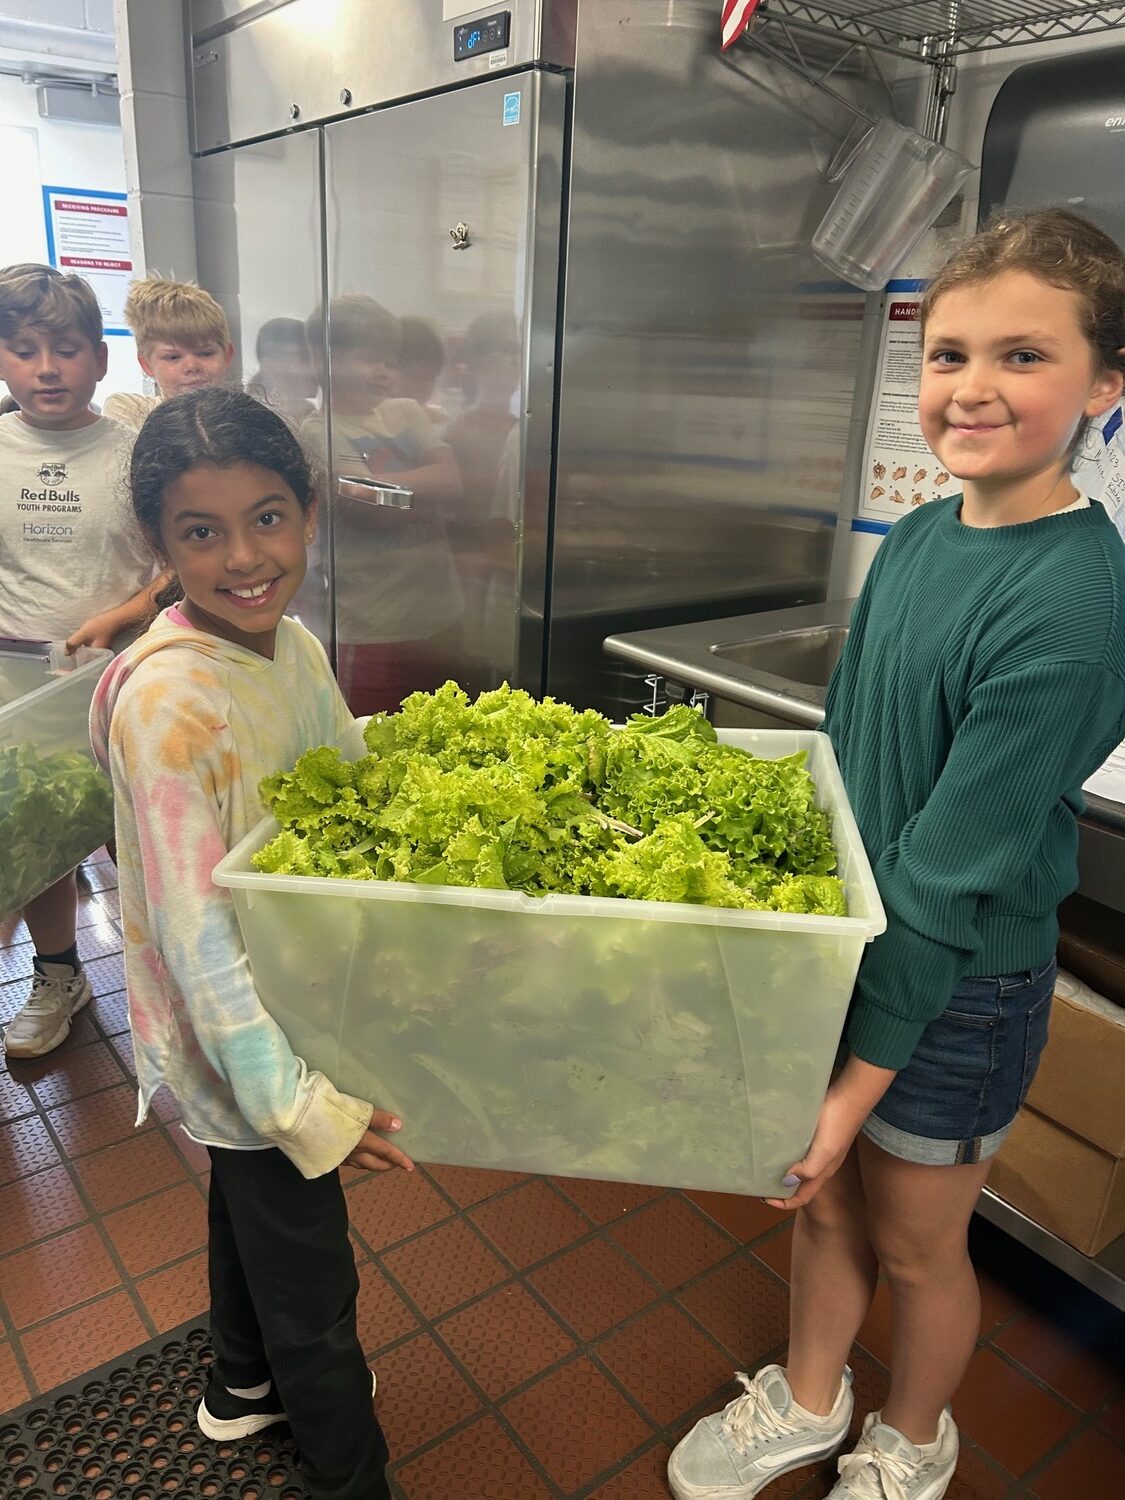 Southampton Elementary School Gardening Club members recently hosted their first farm-to-table lunch at their school. For the lunch, the students planted and cared for lettuce seeds in their school’s indoor tower garden and outdoor garden. Their harvest was served for lunch with the assistance of kitchen staff, who washed and prepped the lettuce. COURTESY SOUTHAMPTON SCHOOL DISTRICT